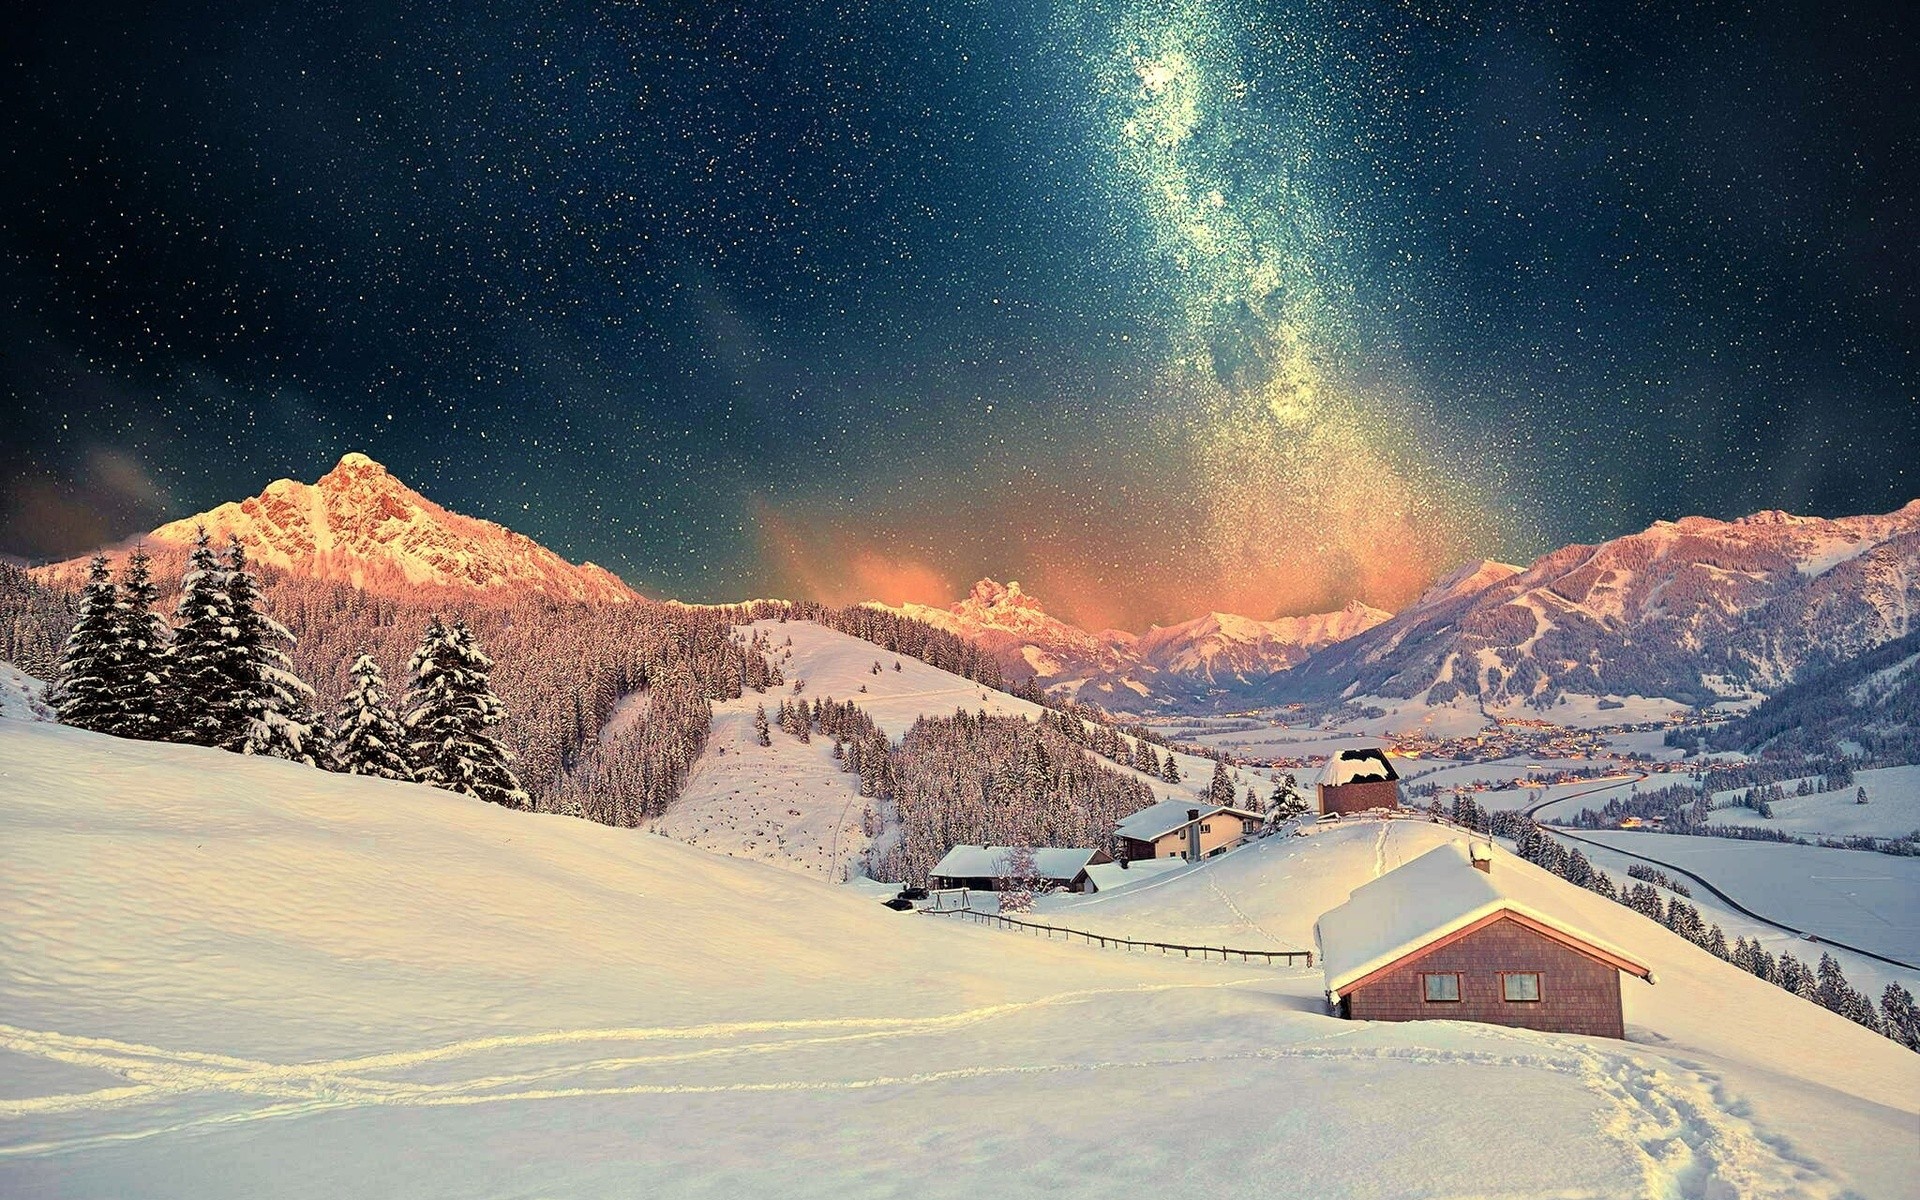 General 1920x1200 pine trees snow stars landscape house night mountains cold outdoors sky